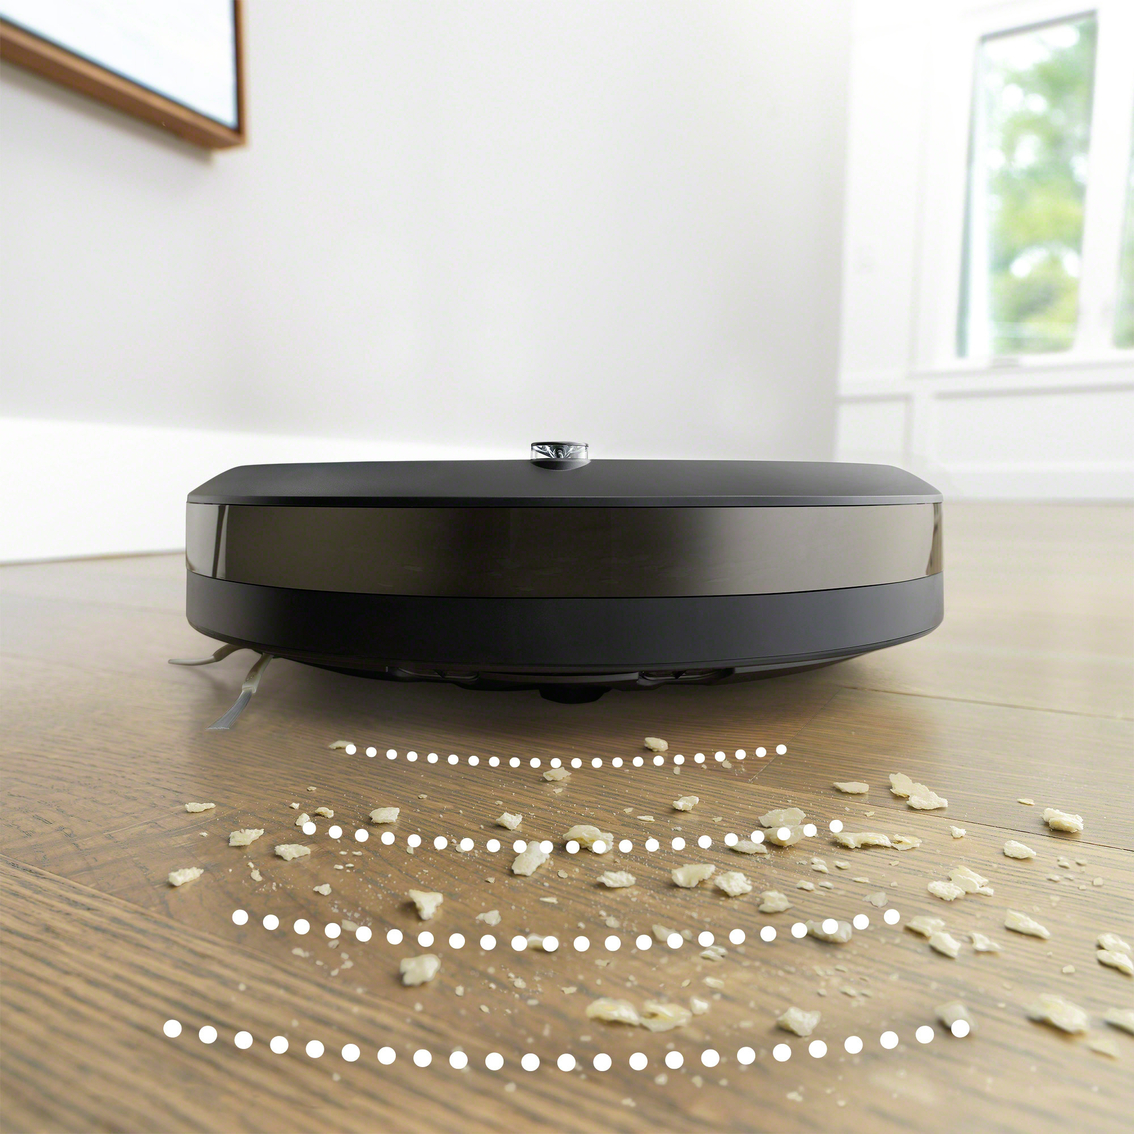 iRobot Roomba i3+ Wi-Fi Connected Robot Vacuum with Automatic Dirt Disposal - Image 8 of 10